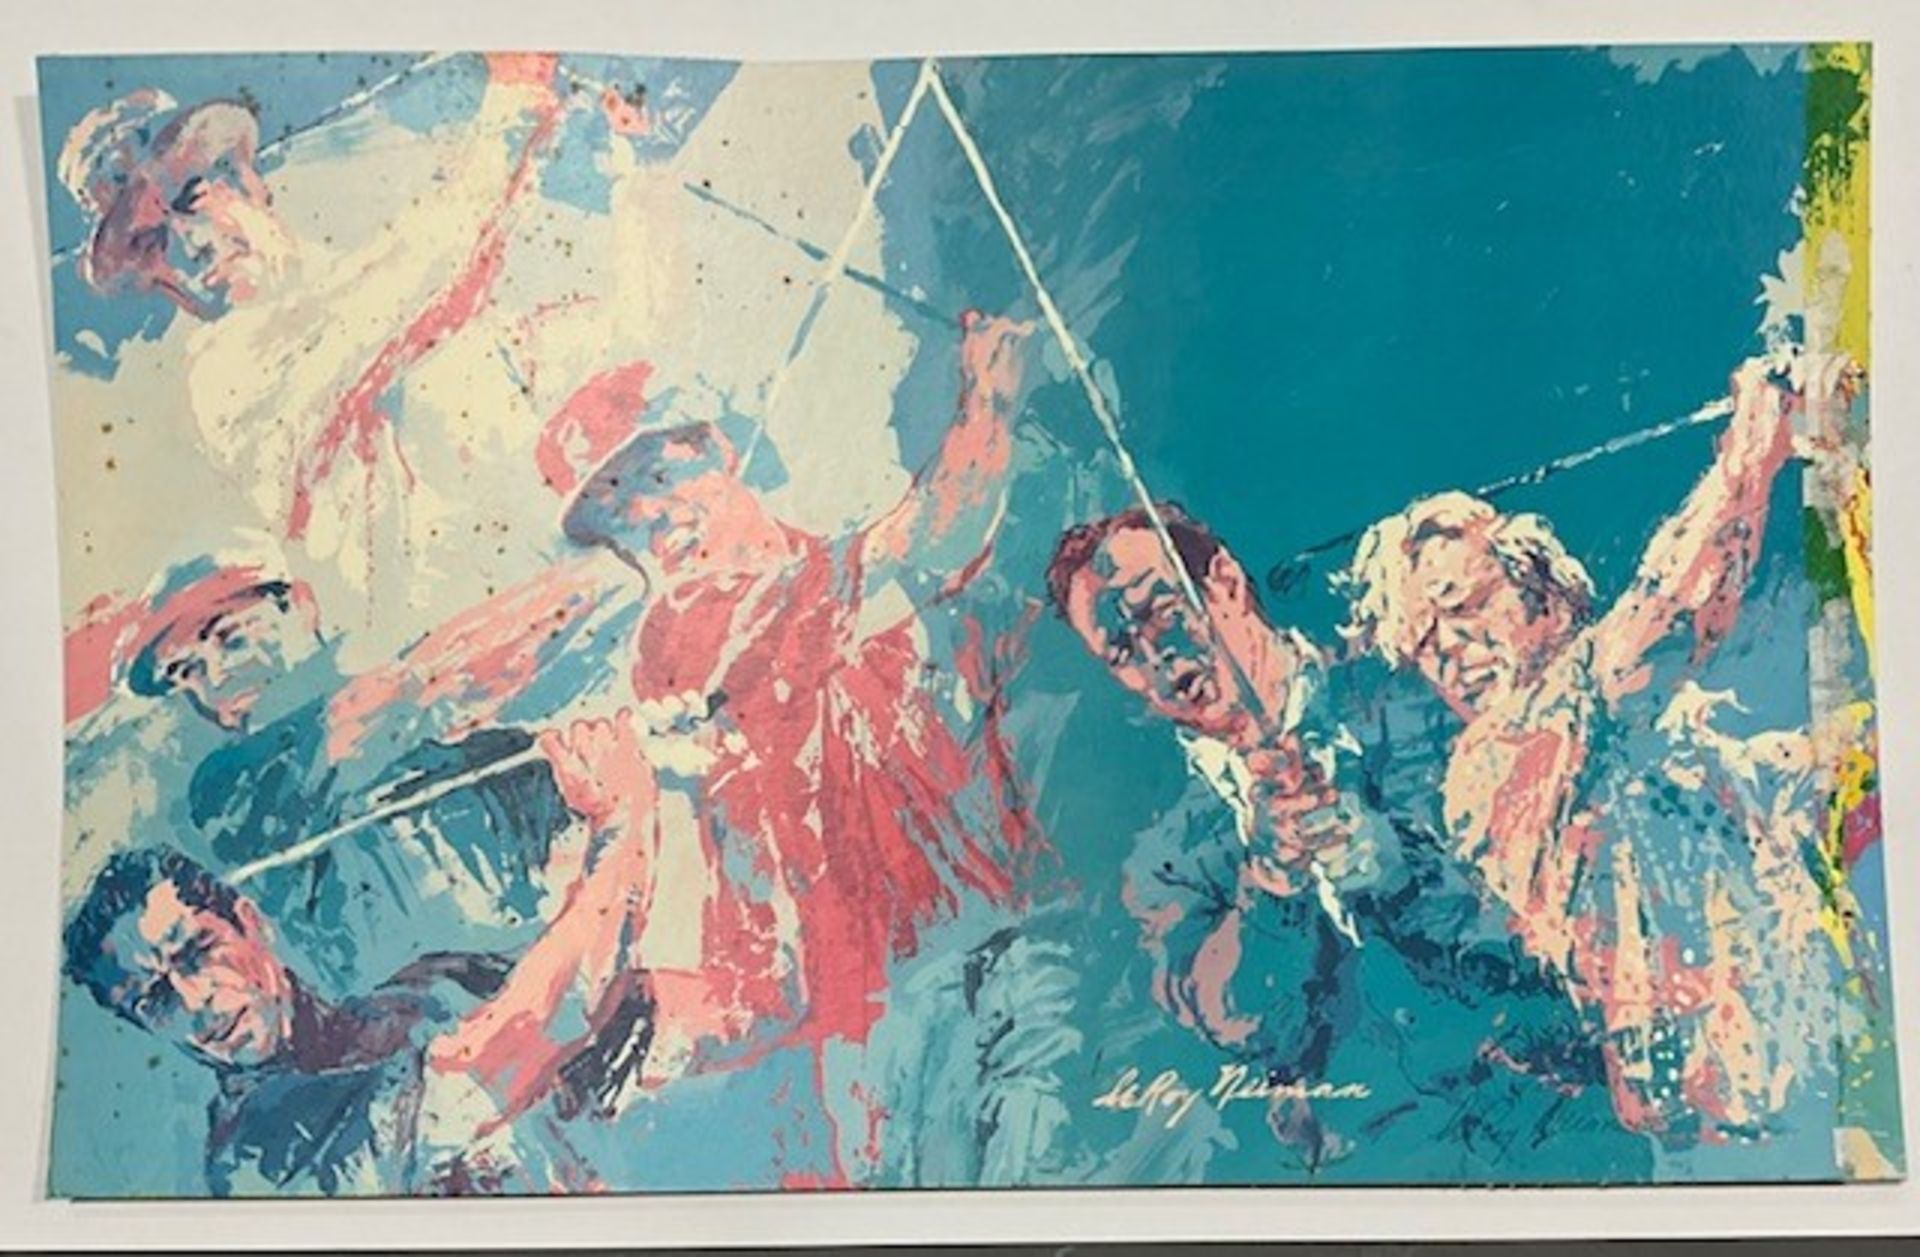 Leroy Neiman Hand Signed "Golfers" Poster